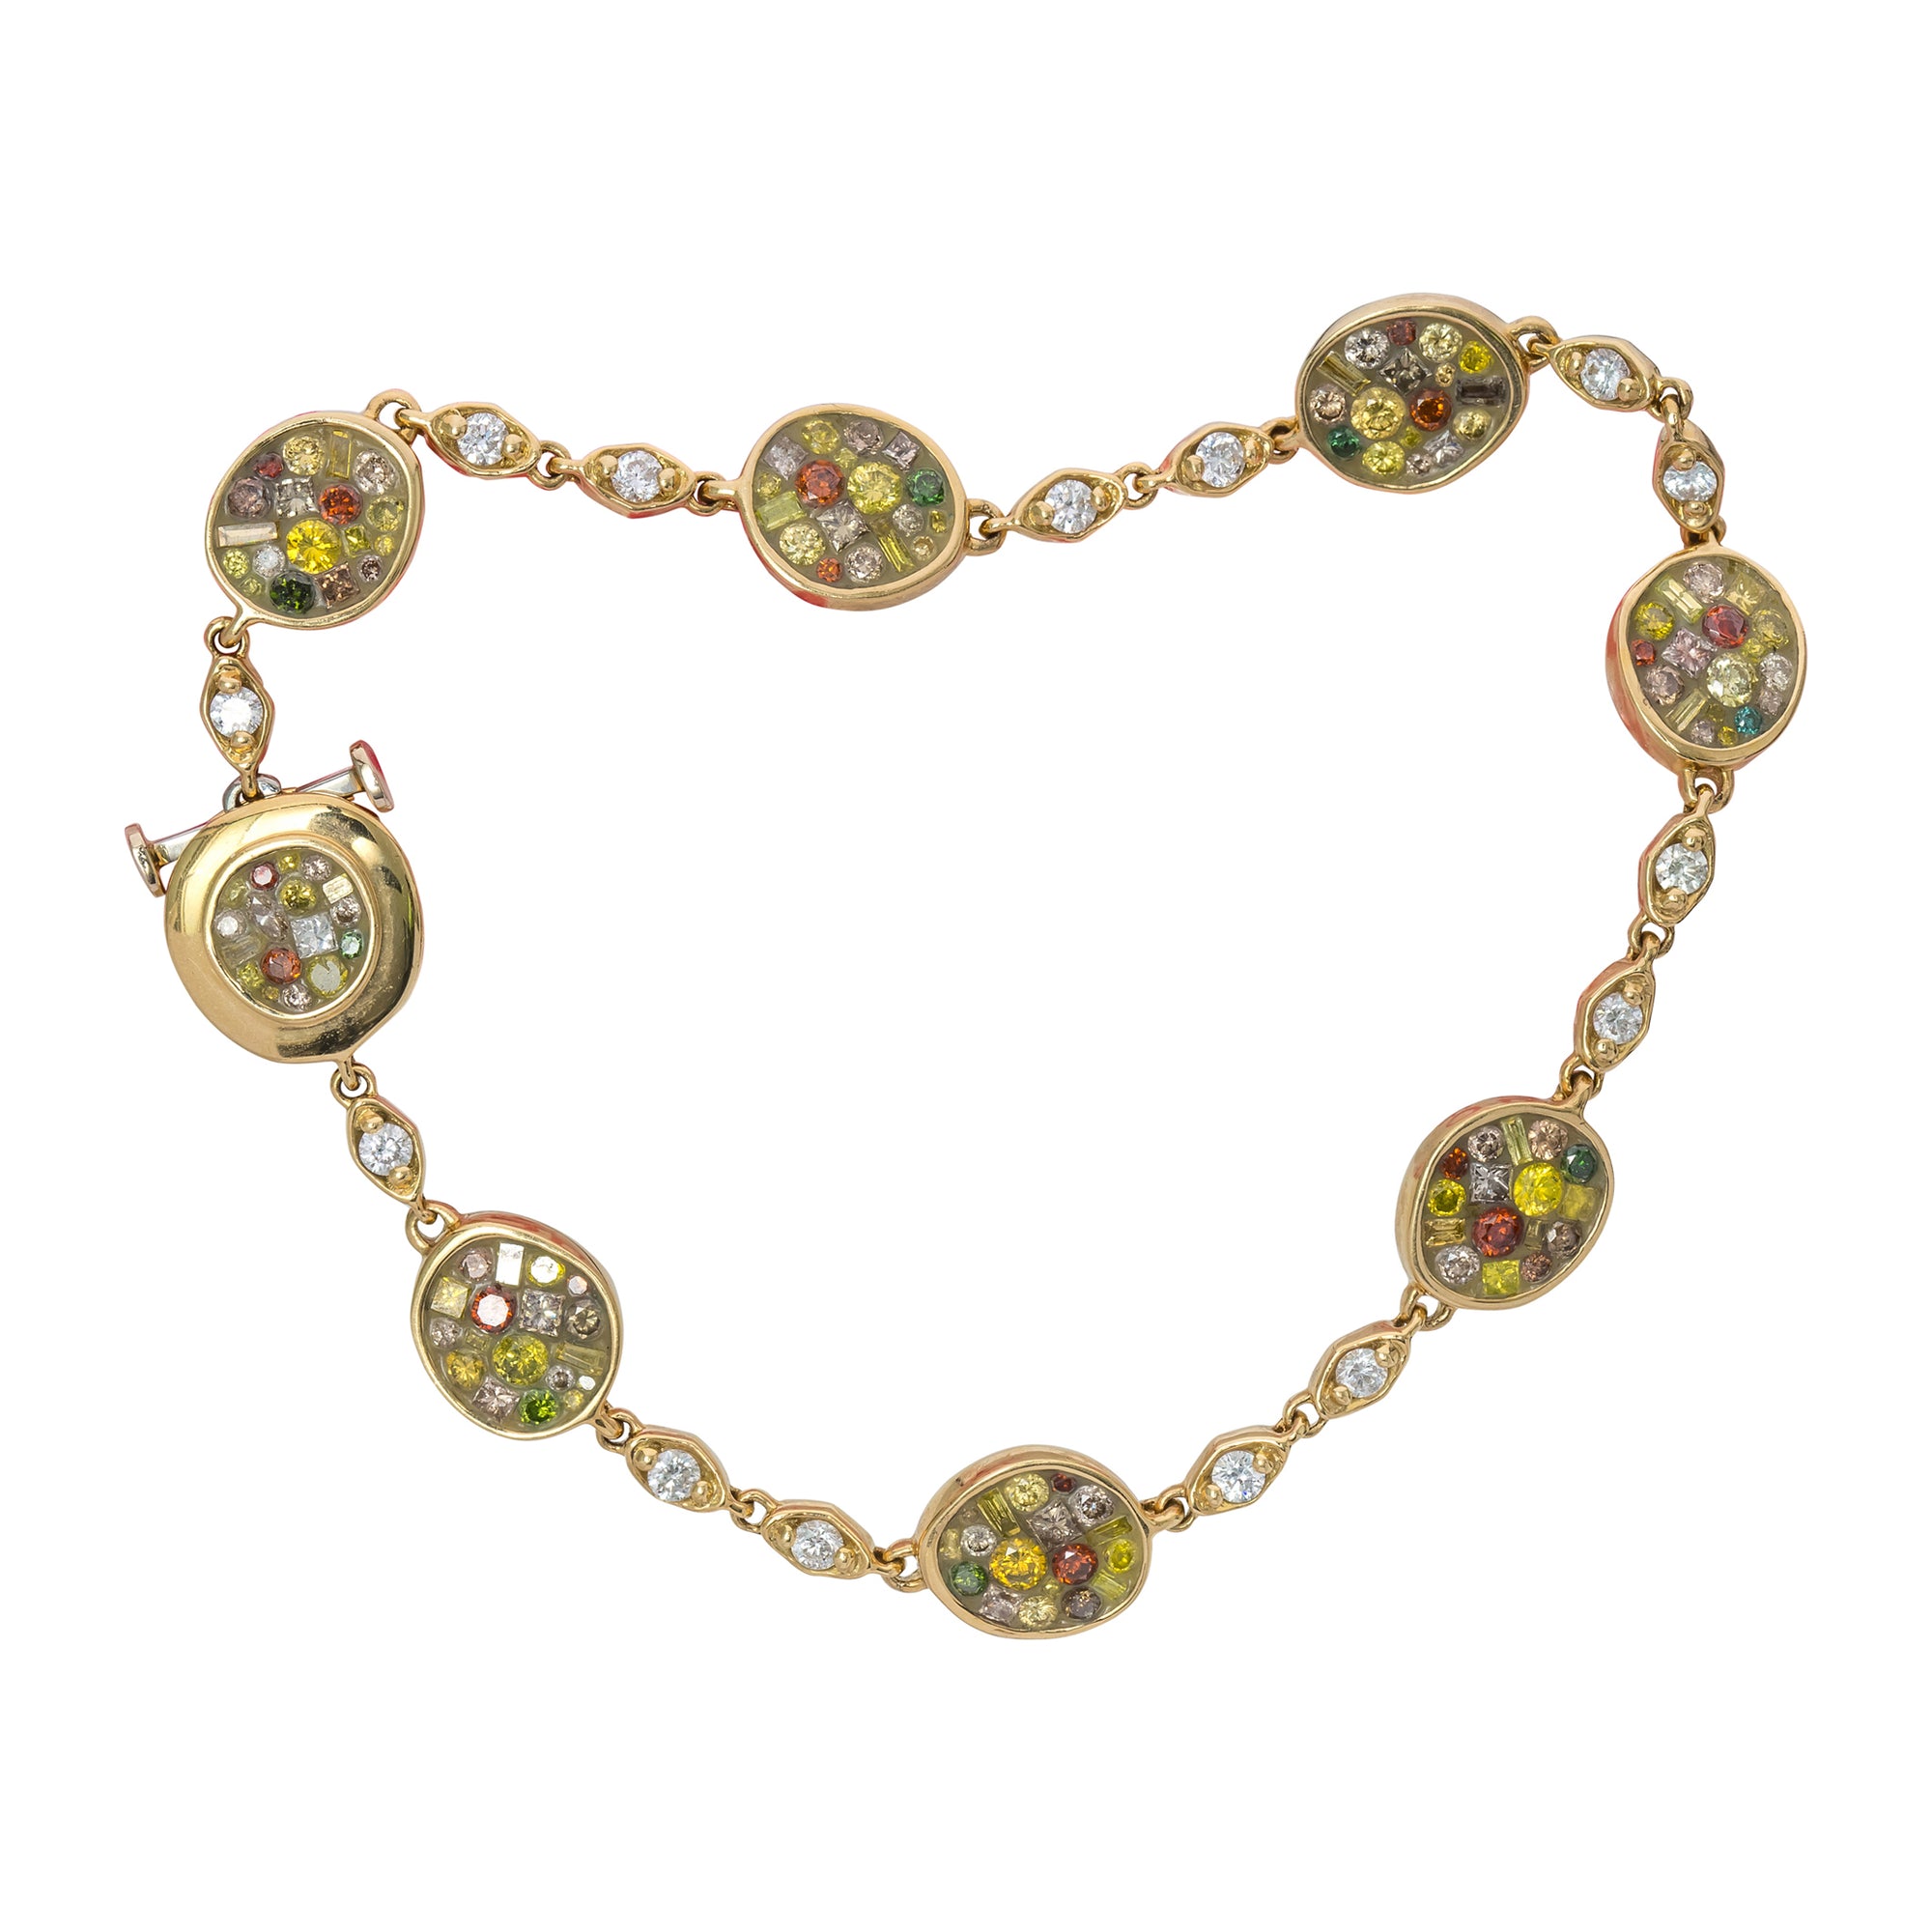 Cinnamon Diamond Pebble Bracelet by Pleve available at Talisman Collection Fine Jewelers in El Dorado Hills, CA and online. Specs: 2.80 cts color enhanced diamonds, 18k yellow gold.